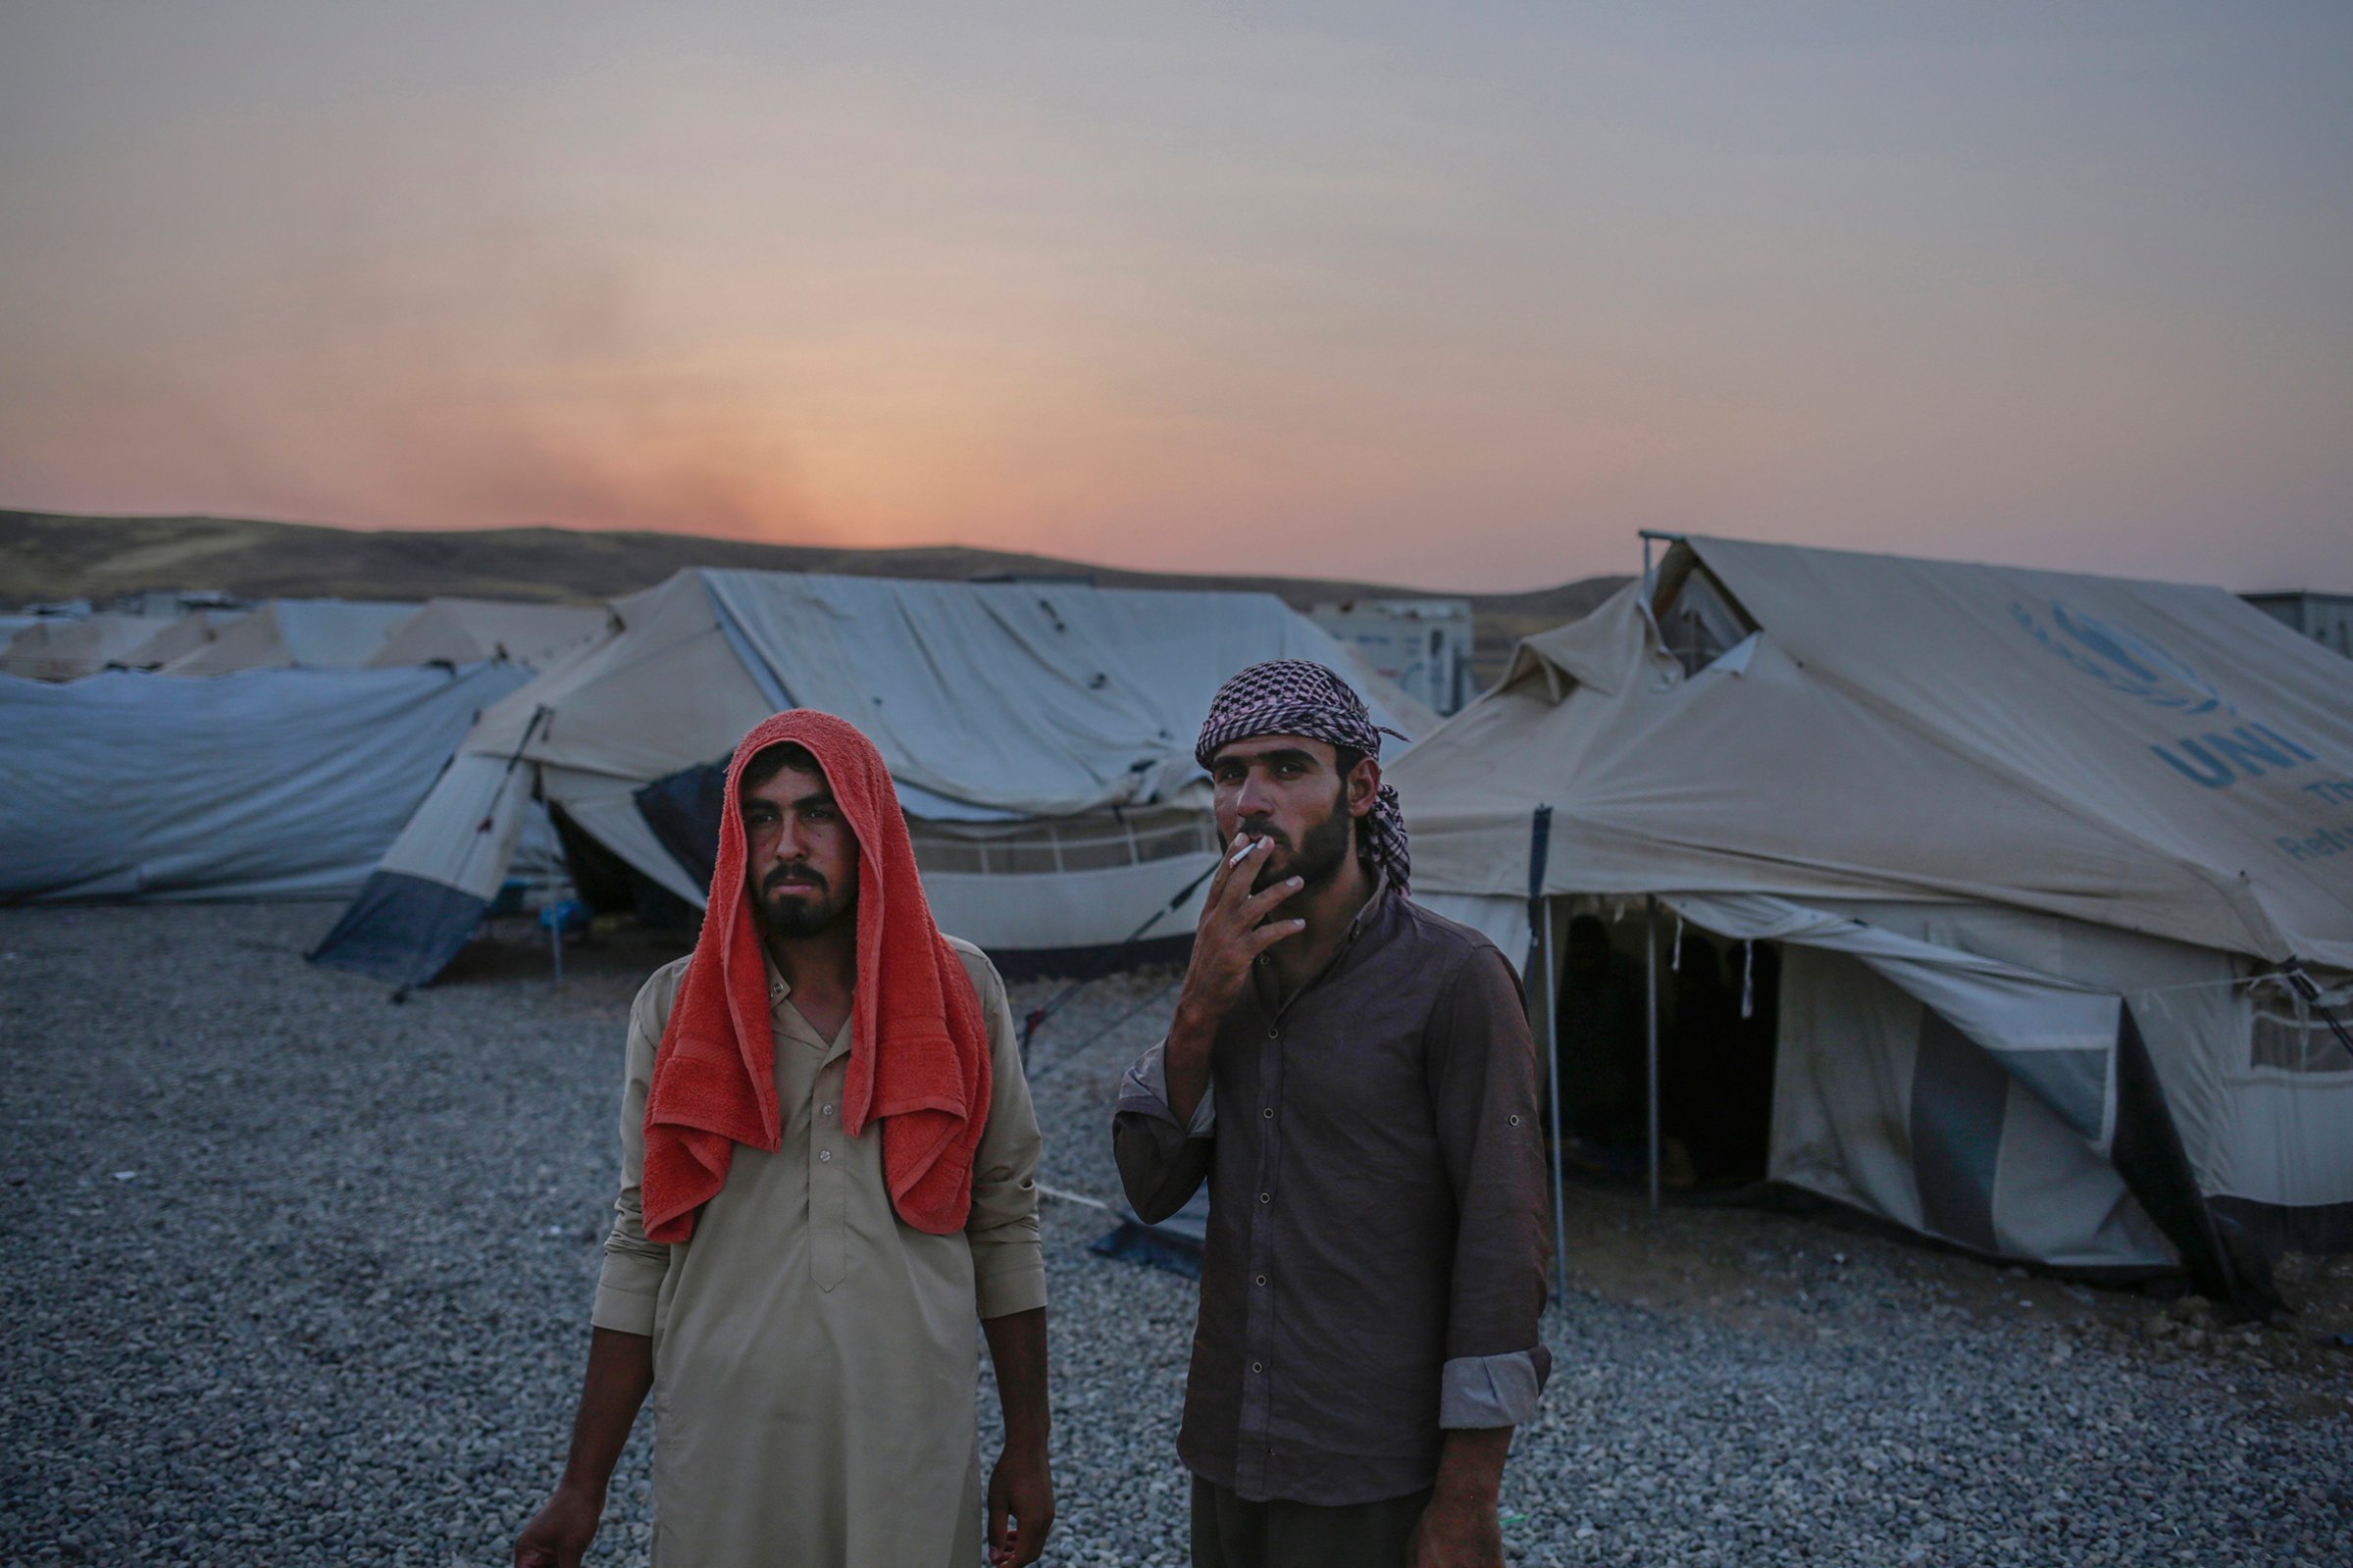 Younes Abdullah, left, and his nephew Rakan Hamid Jasim stand inside the Chamakor camp for displaced people in Northern Iraq. They both want to return to their homes in the town of Zummar, currently under Kurdish control, but Kurdish security forces don't allow them to return. The two relatives lived under Islamic State rule for almost three years.